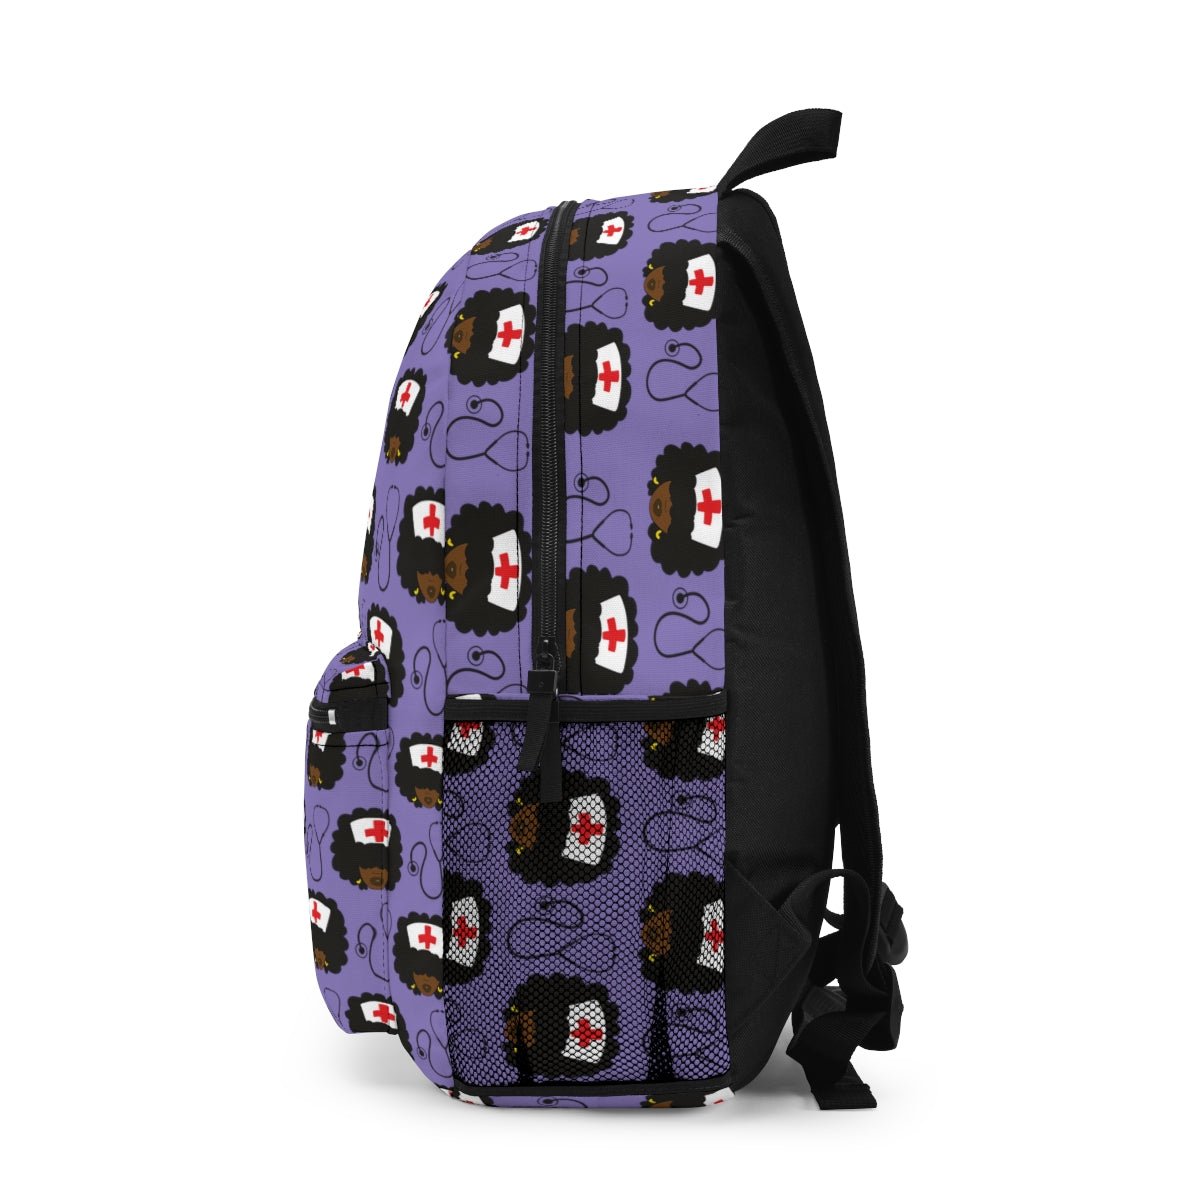 Afro Nurse Backpack - The Trini Gee